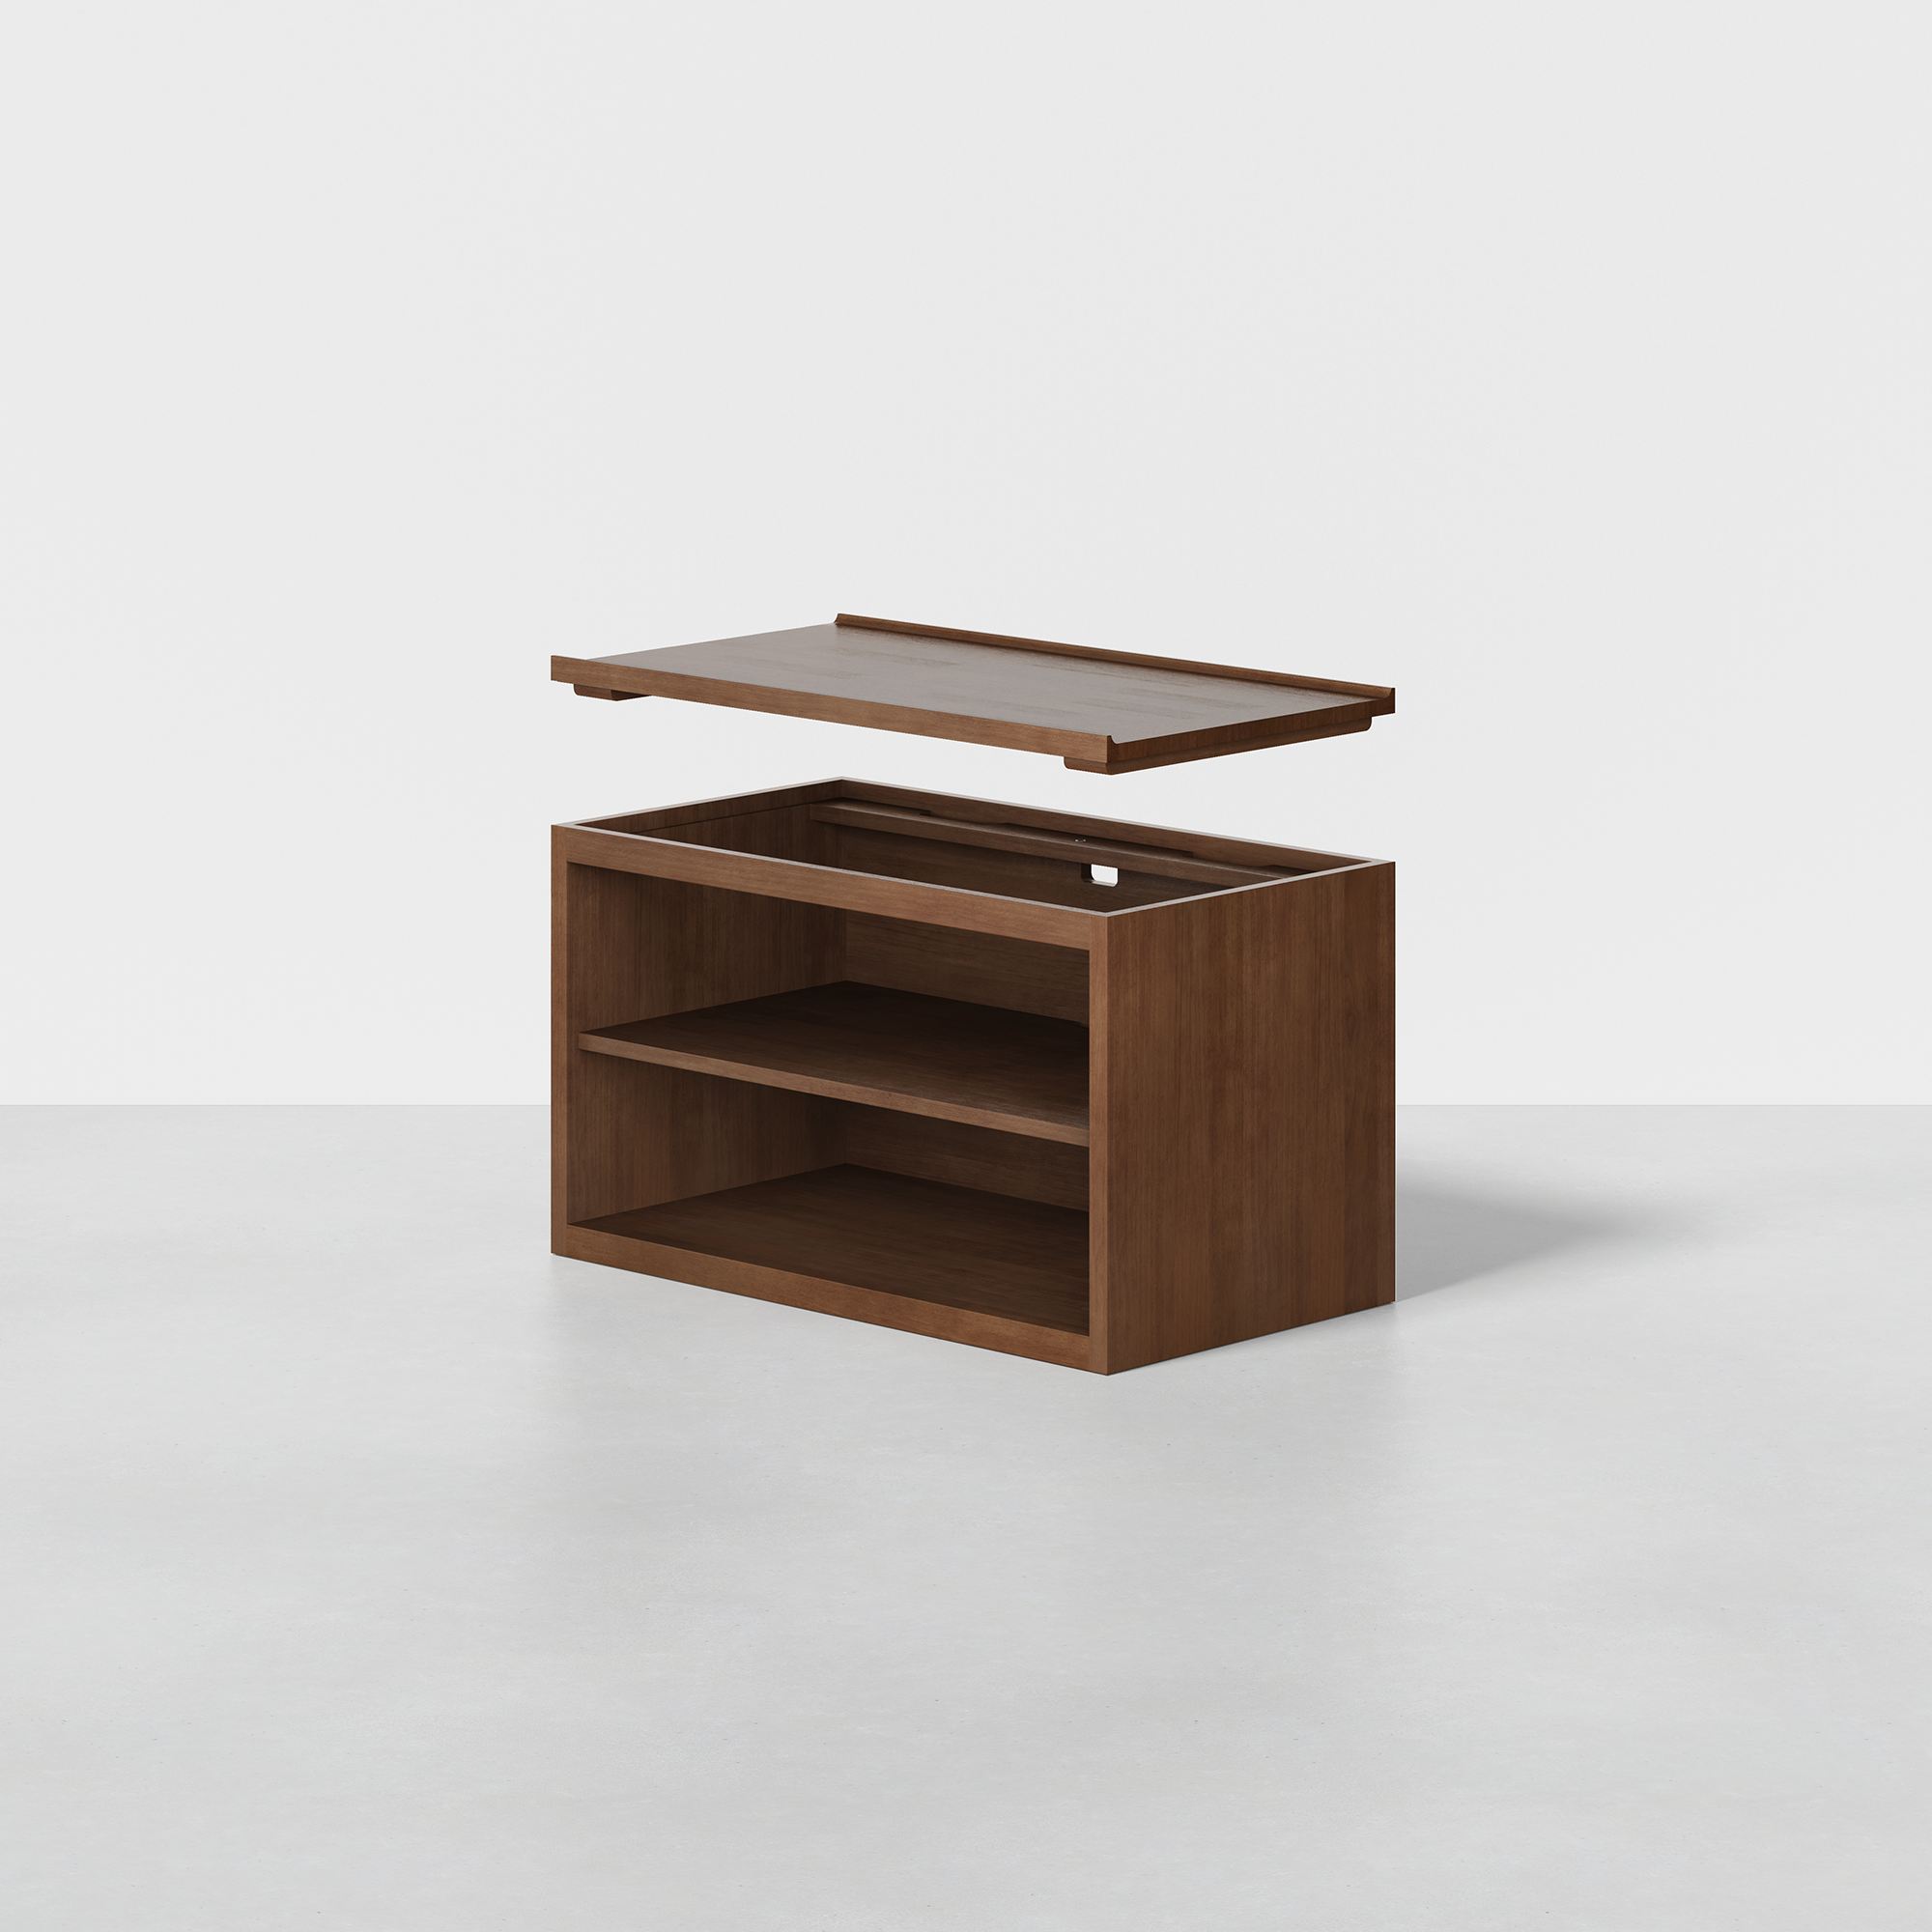 The Cubby (Walnut / Base Cubby) - Render - Angled